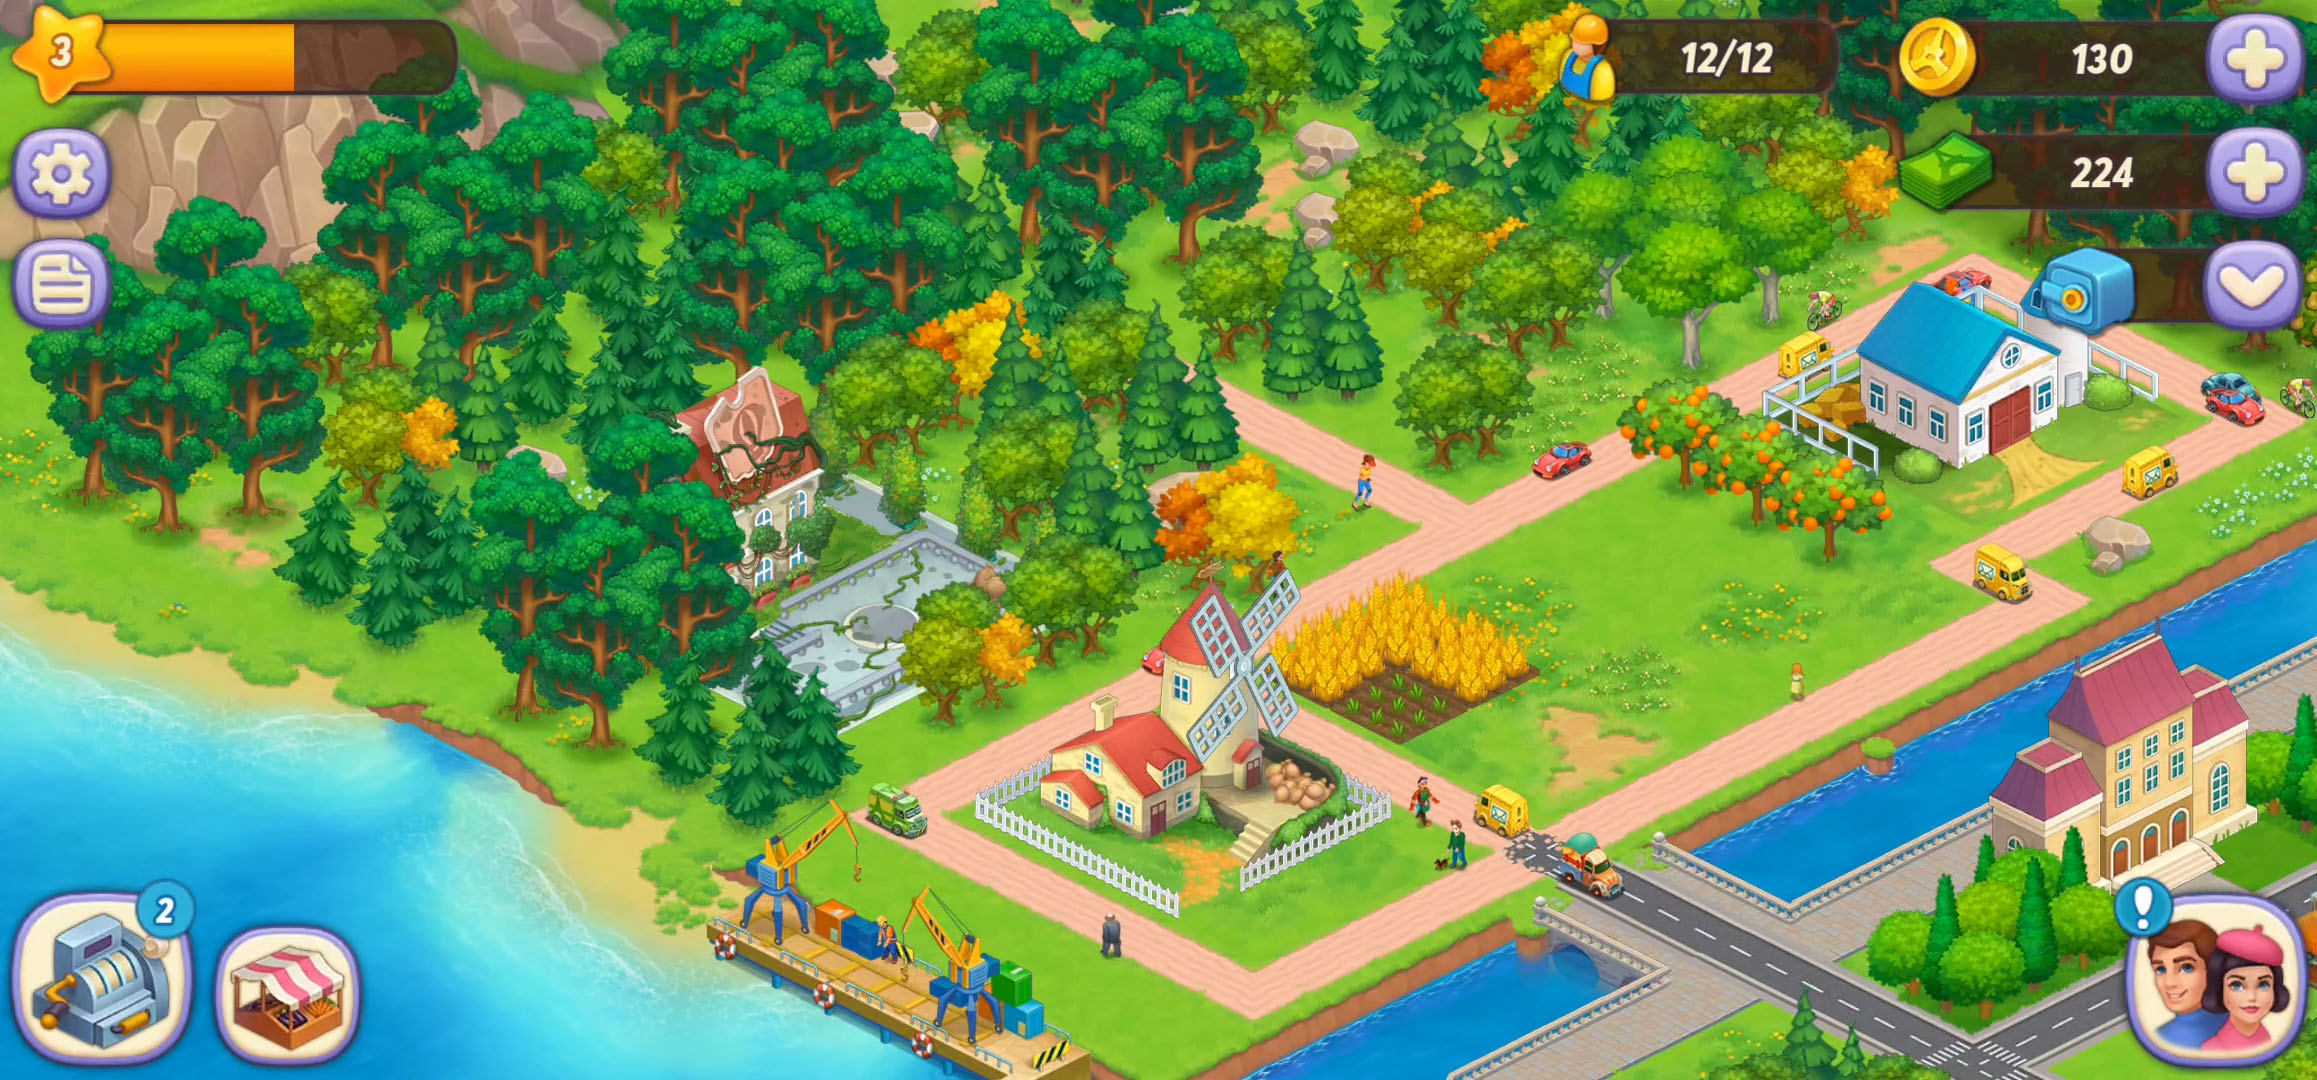 Gameplay of the Paris: City Adventure for Android phone or tablet.